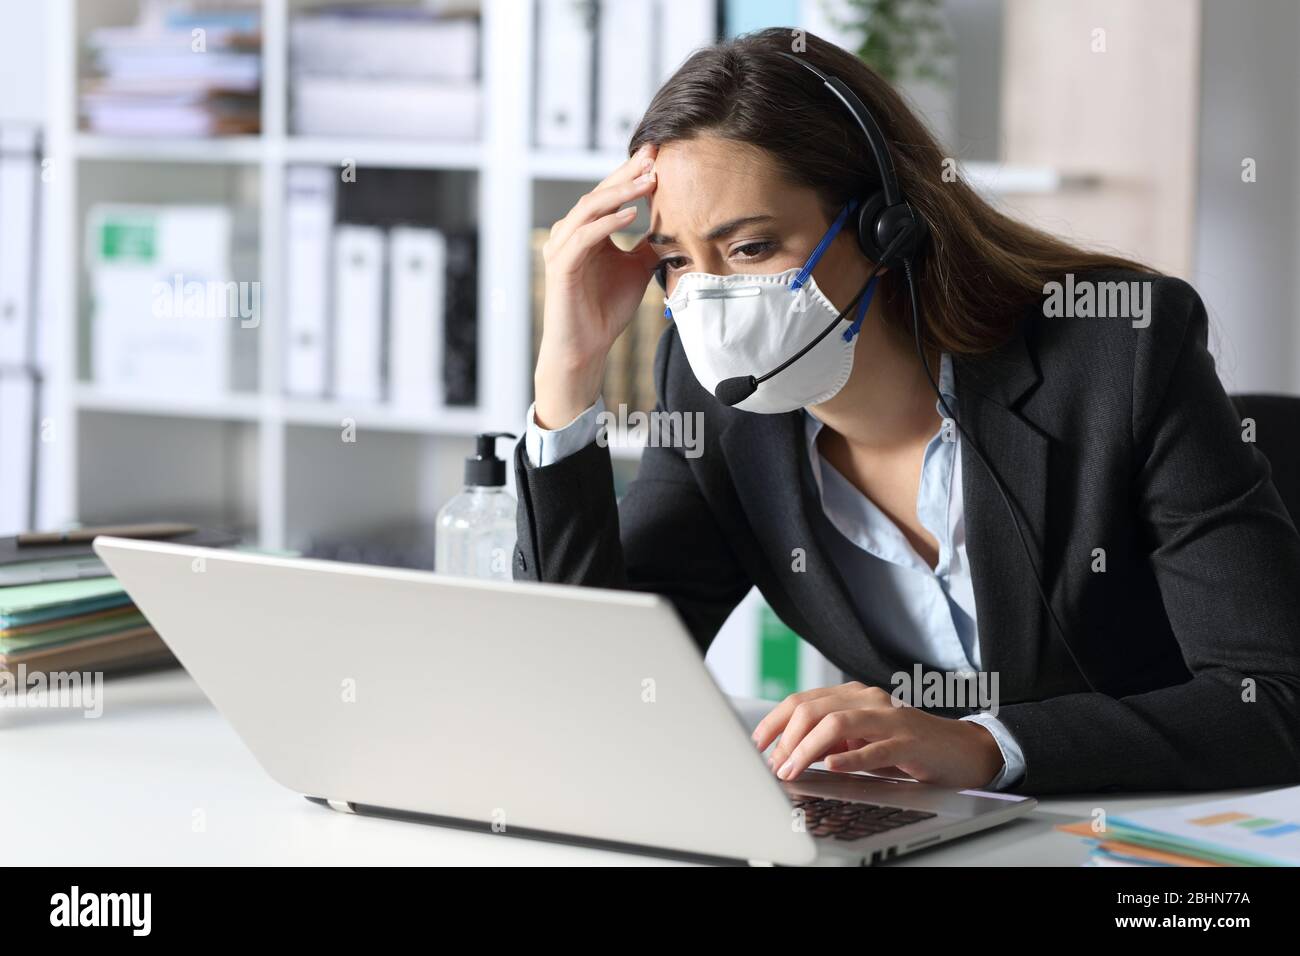 Worried telemarketer with protective mask looking at bad news on laptop in the office Stock Photo